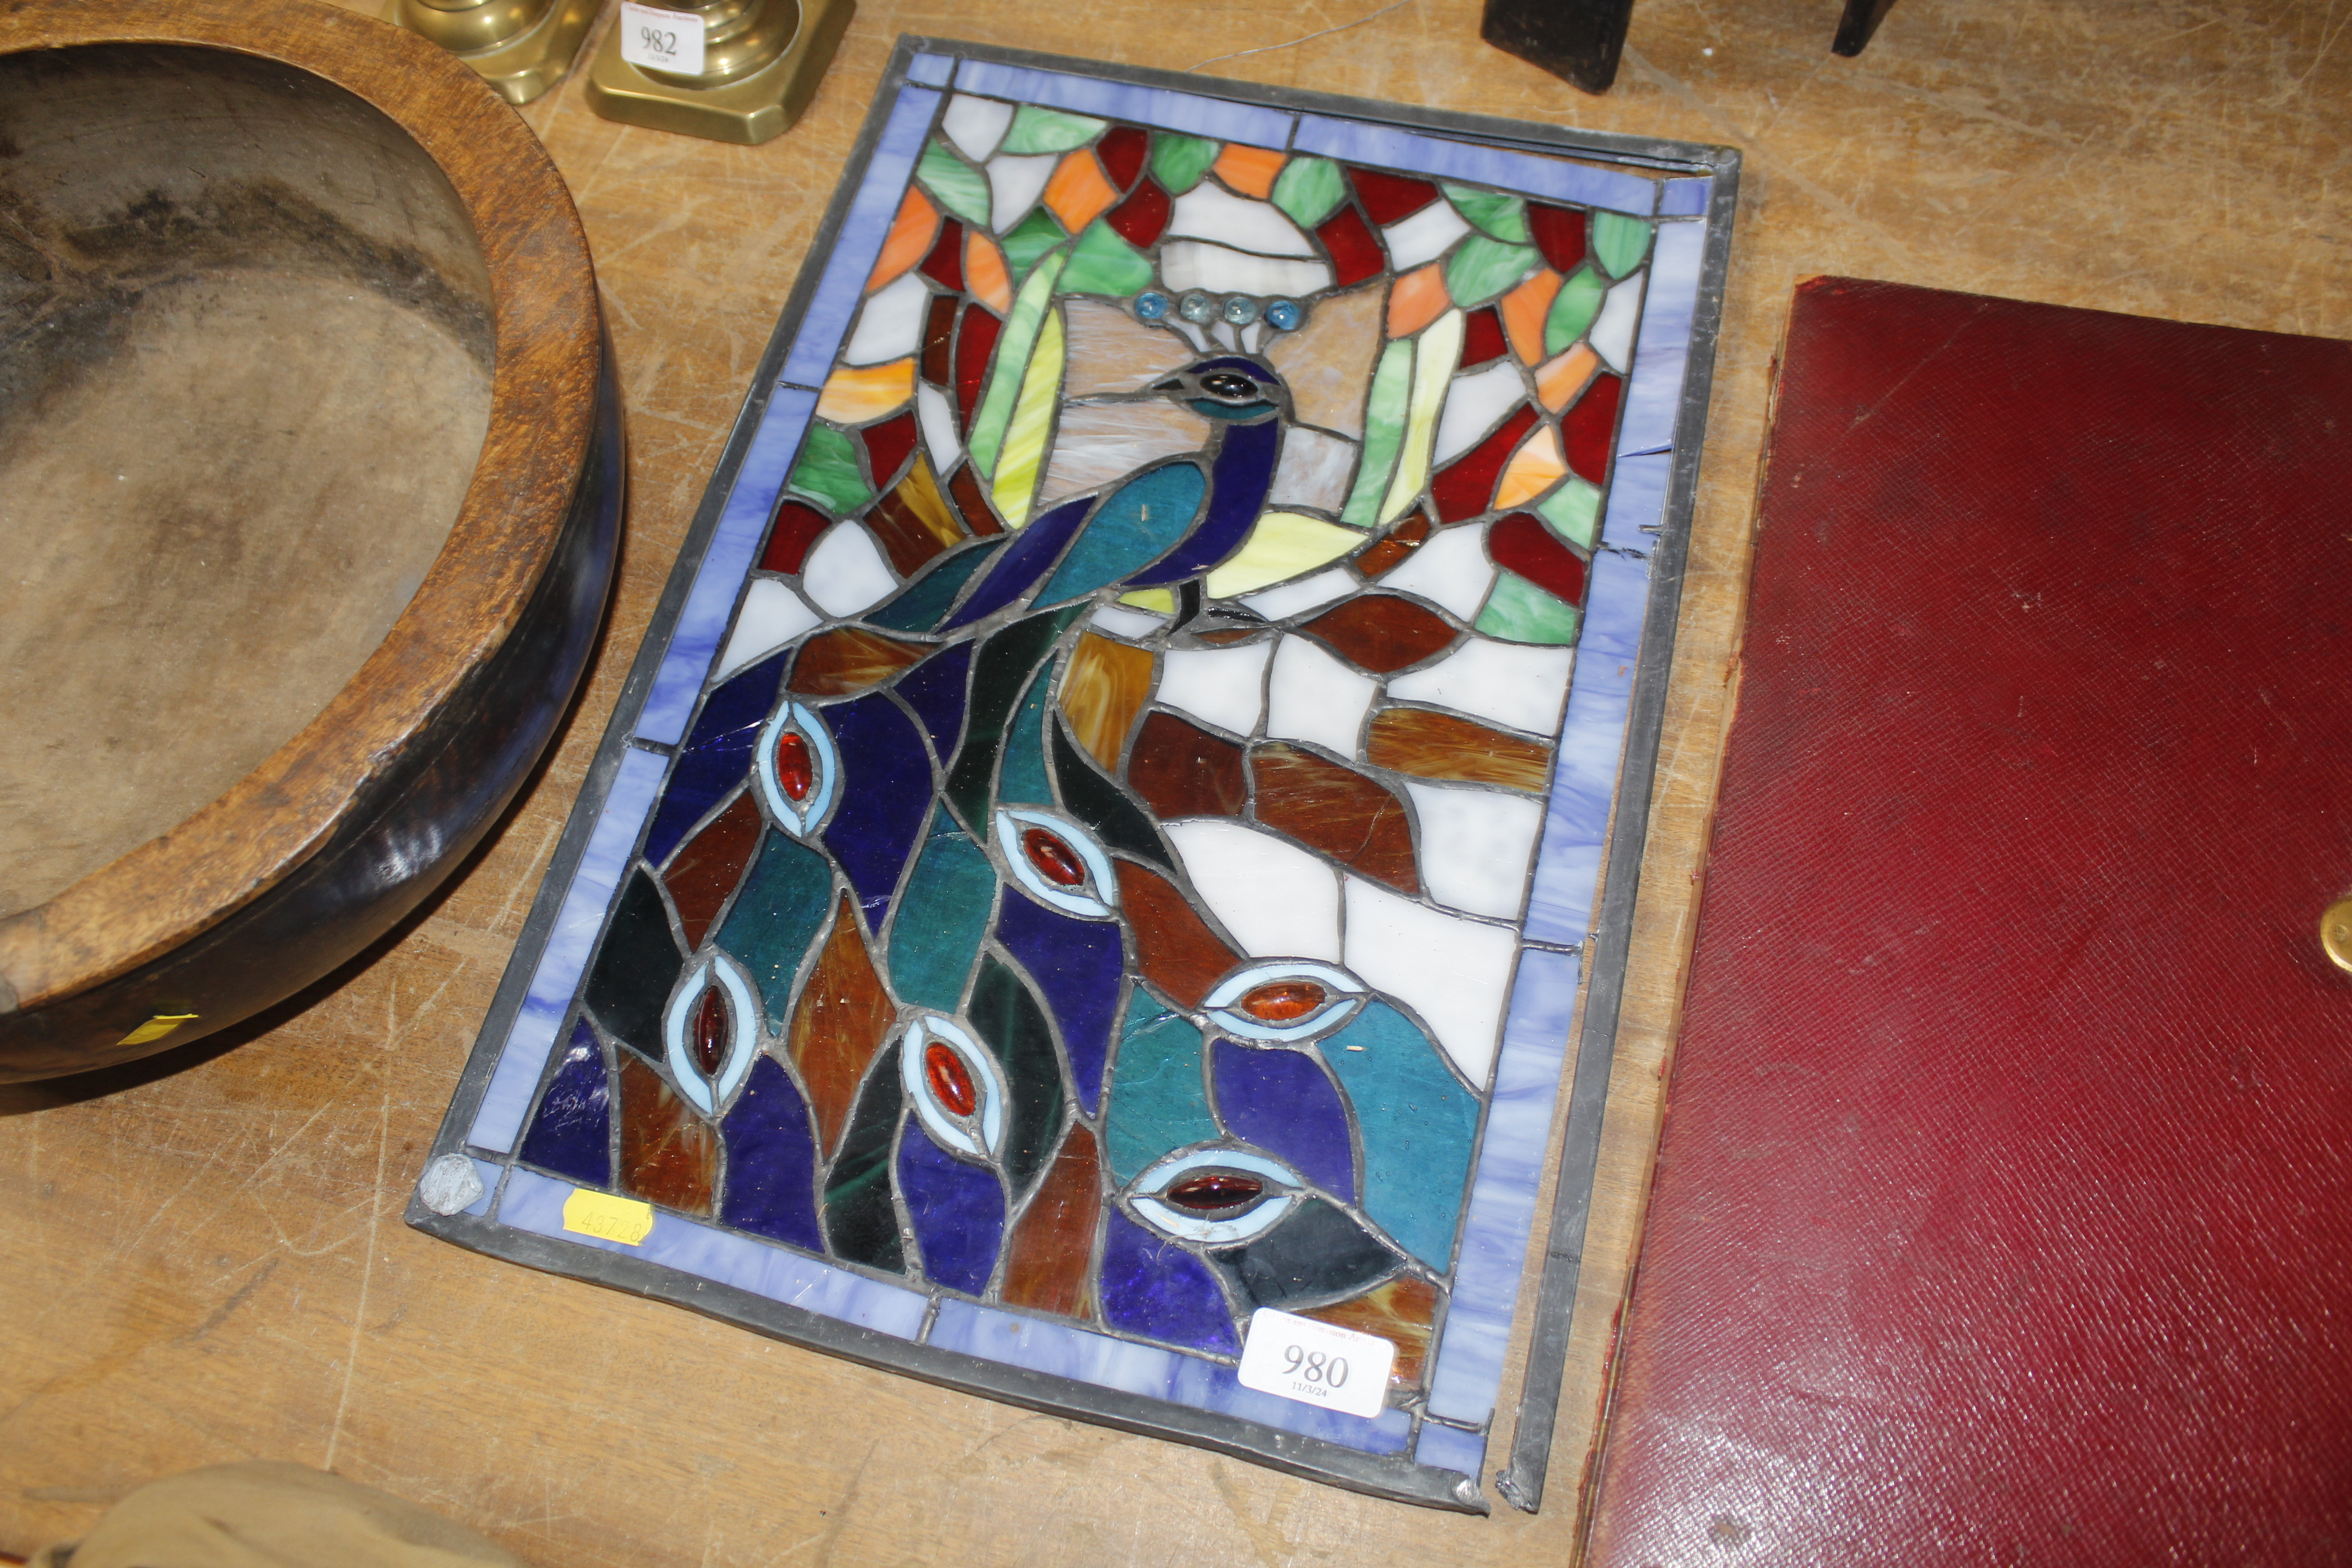 A stained glass panel decorated with a peacock